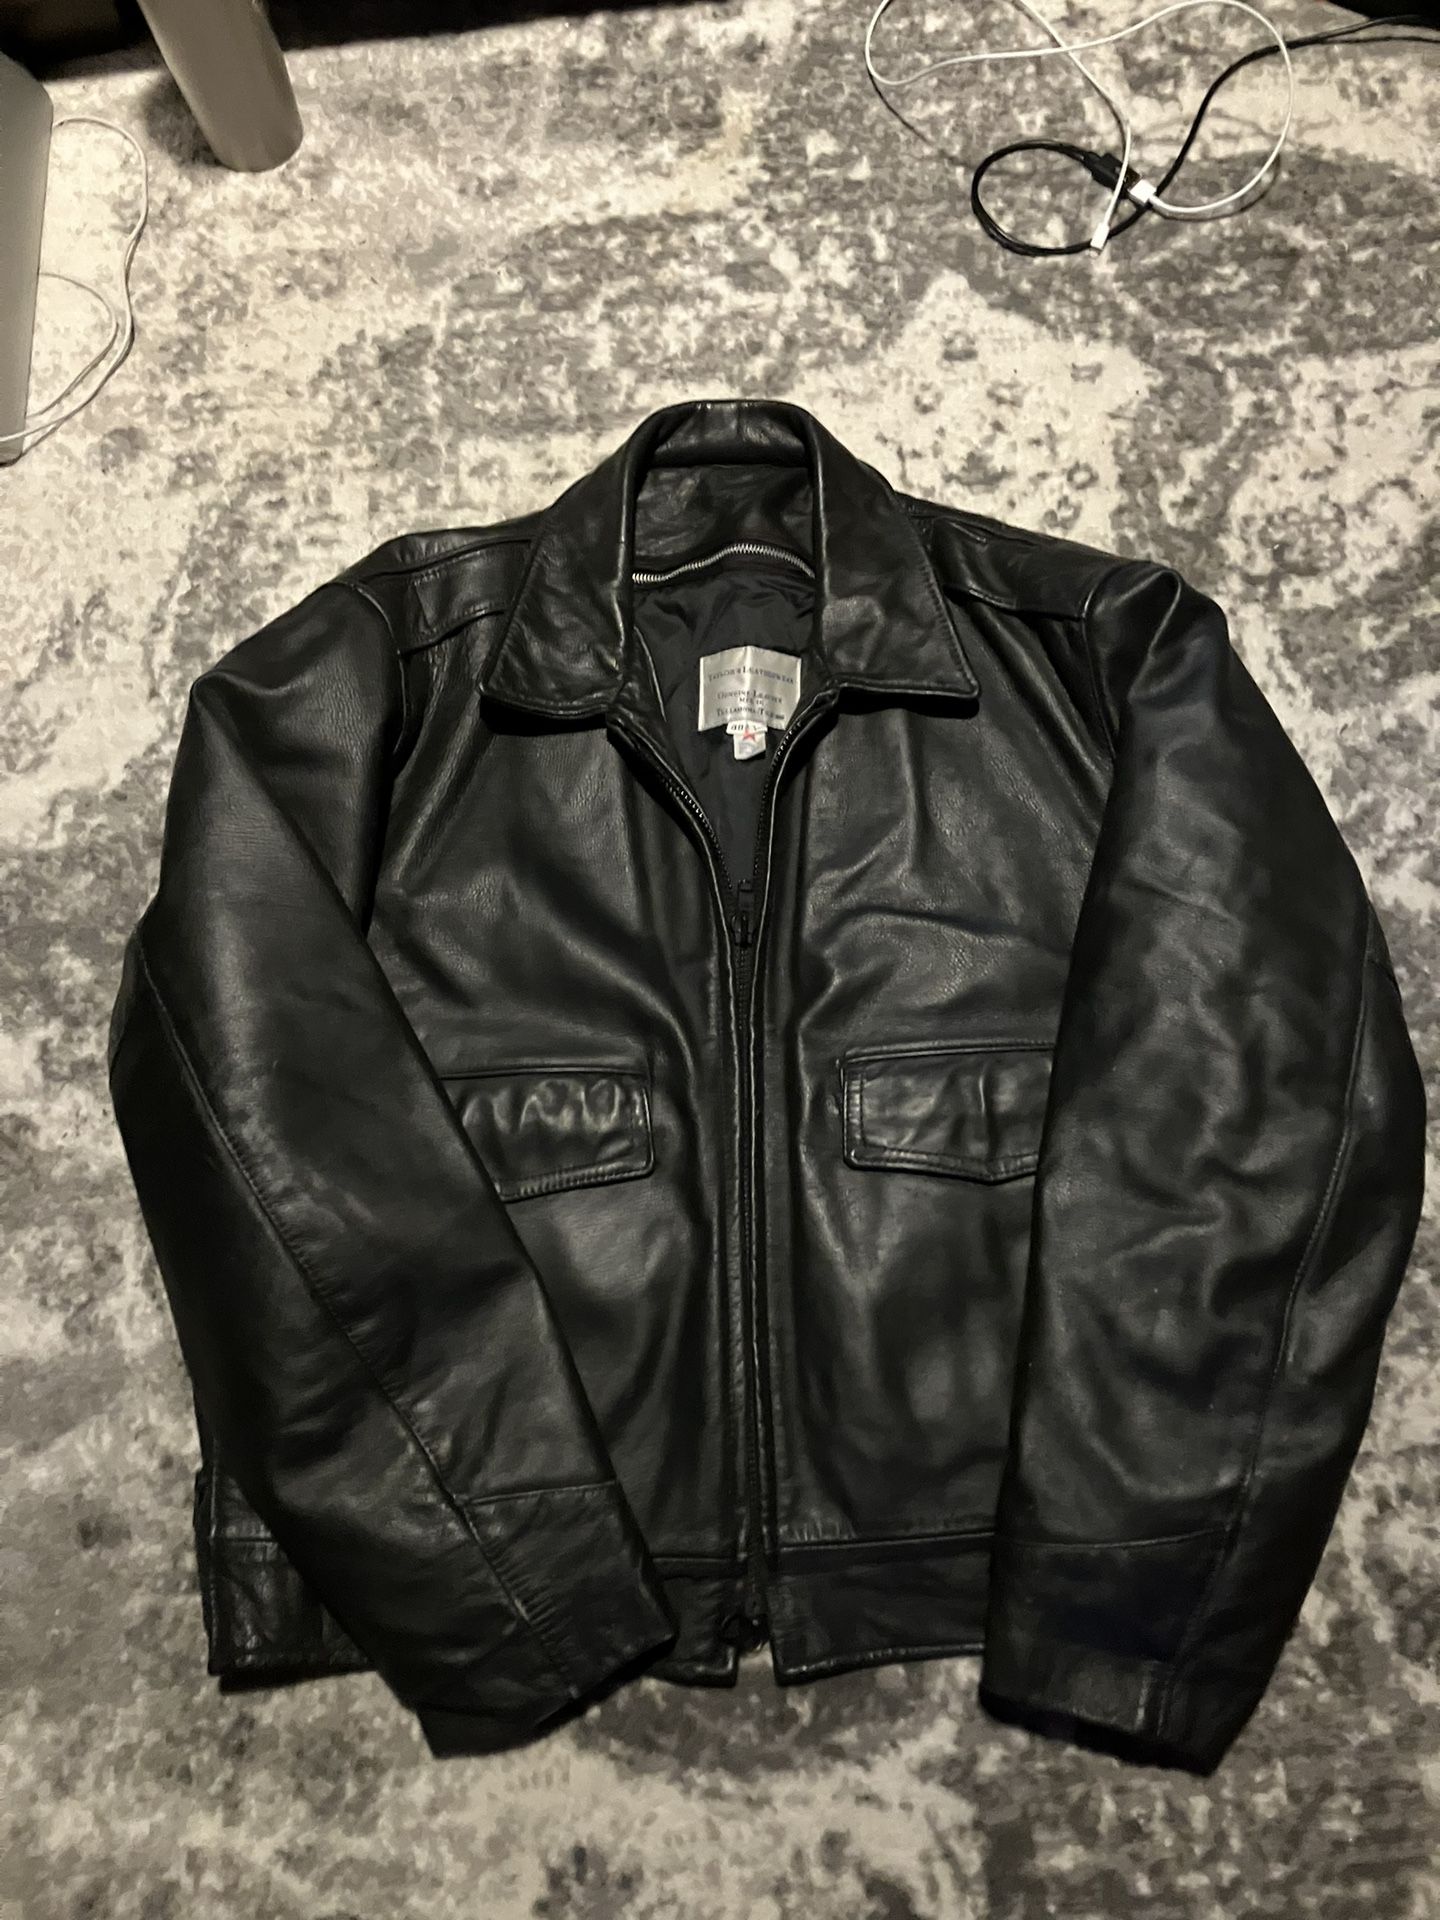 Leather motorcycle jacket 48L